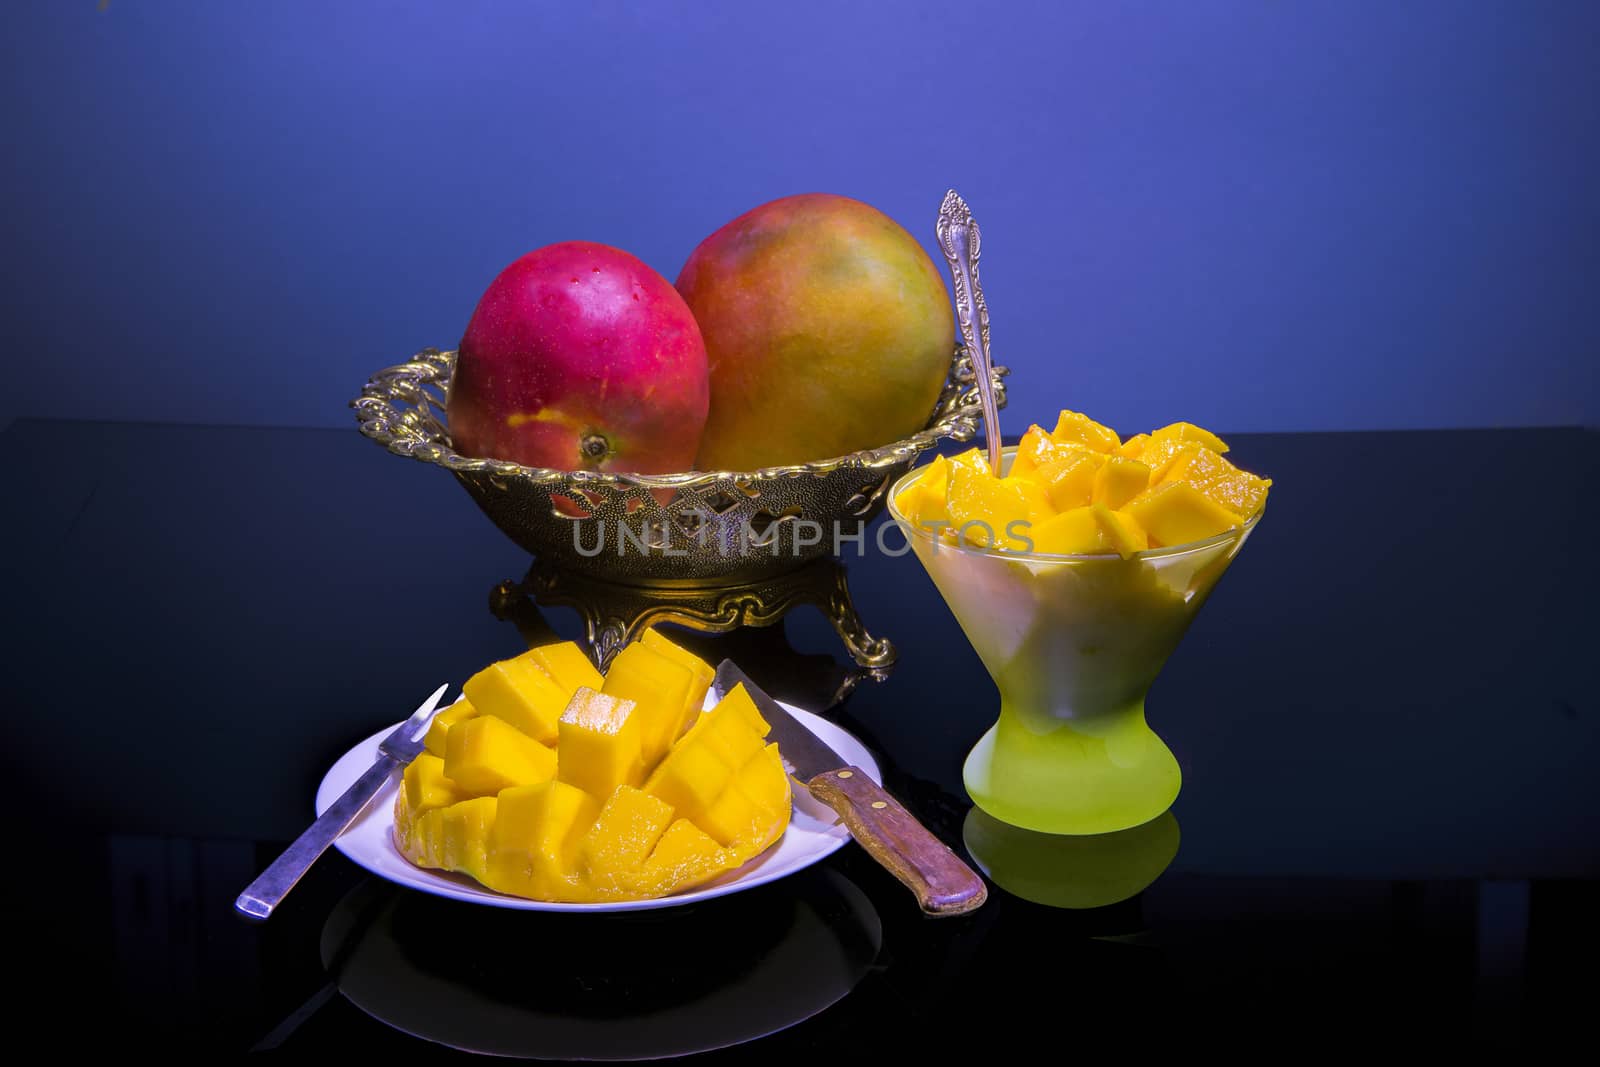 Ripe mangoes and cut into a plate and a glass